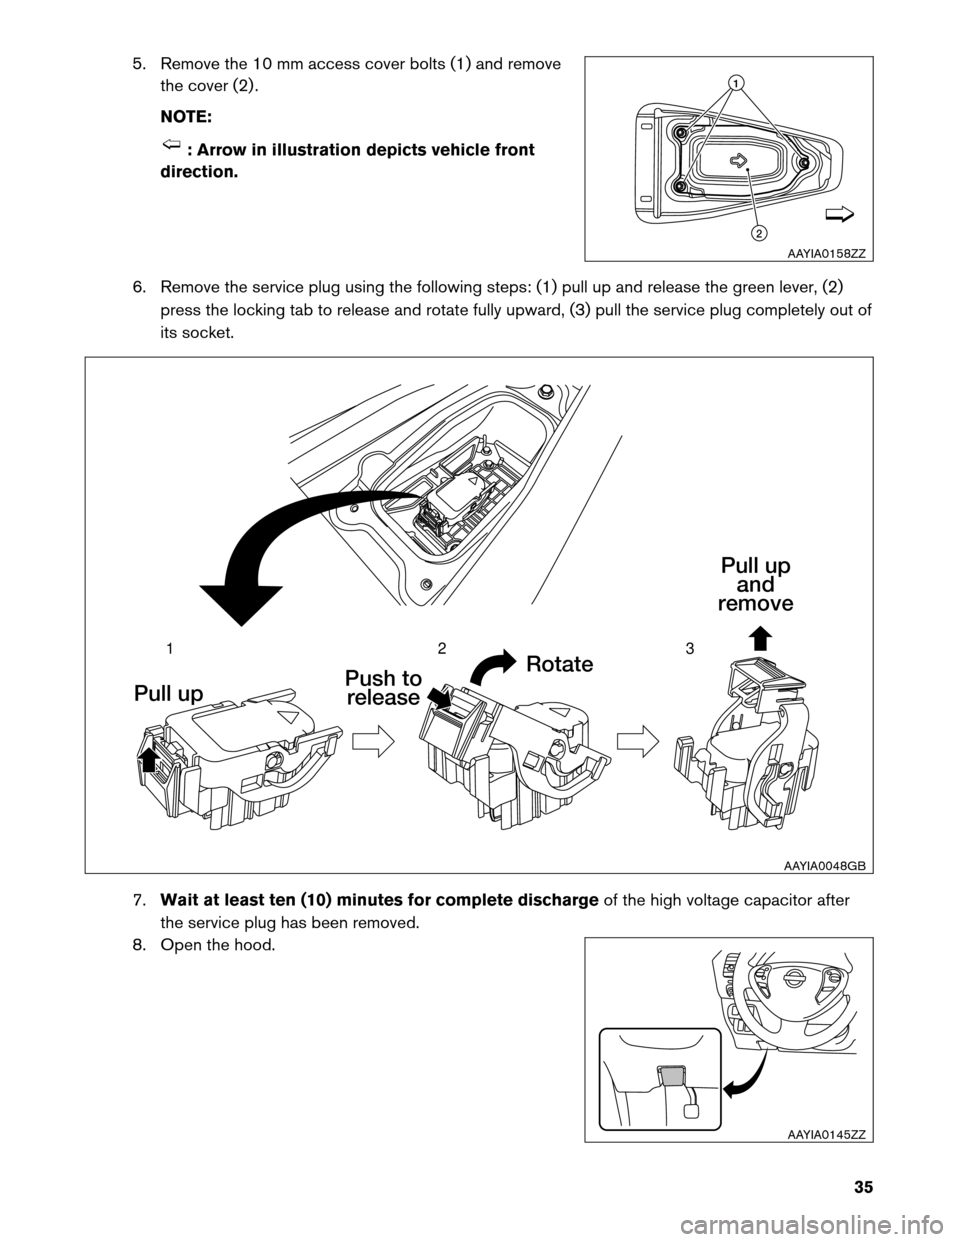 NISSAN LEAF 2013 1.G Roadside Assistance Guide 5. Remove the 10 mm access cover bolts (1) and remove
the cover (2) .
NOTE: : Arrow in illustration depicts vehicle front
direction.
6.

Remove the service plug using the following steps: (1) pull up 